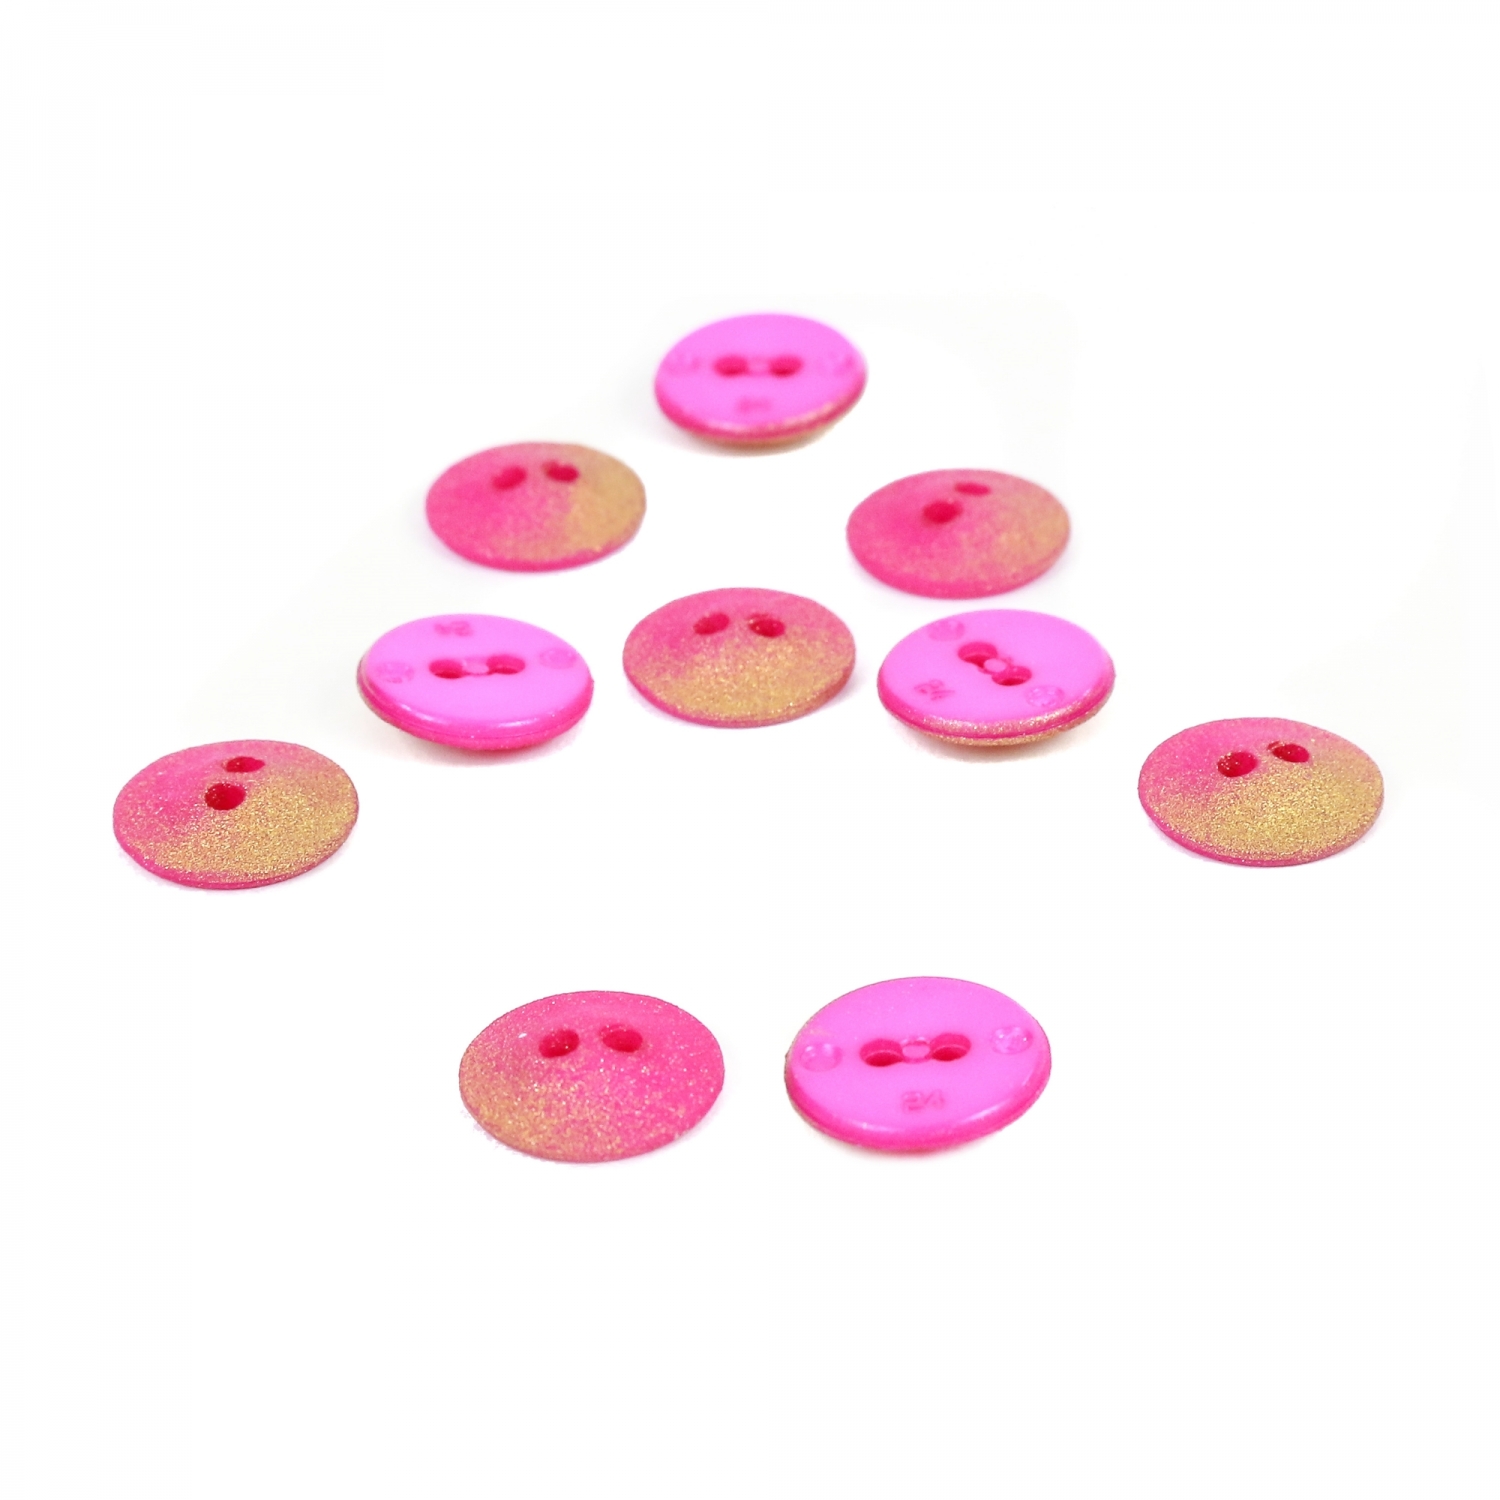 2 Holes Buttons, 15 mm (50 pcs/pack)Code: 25239/24